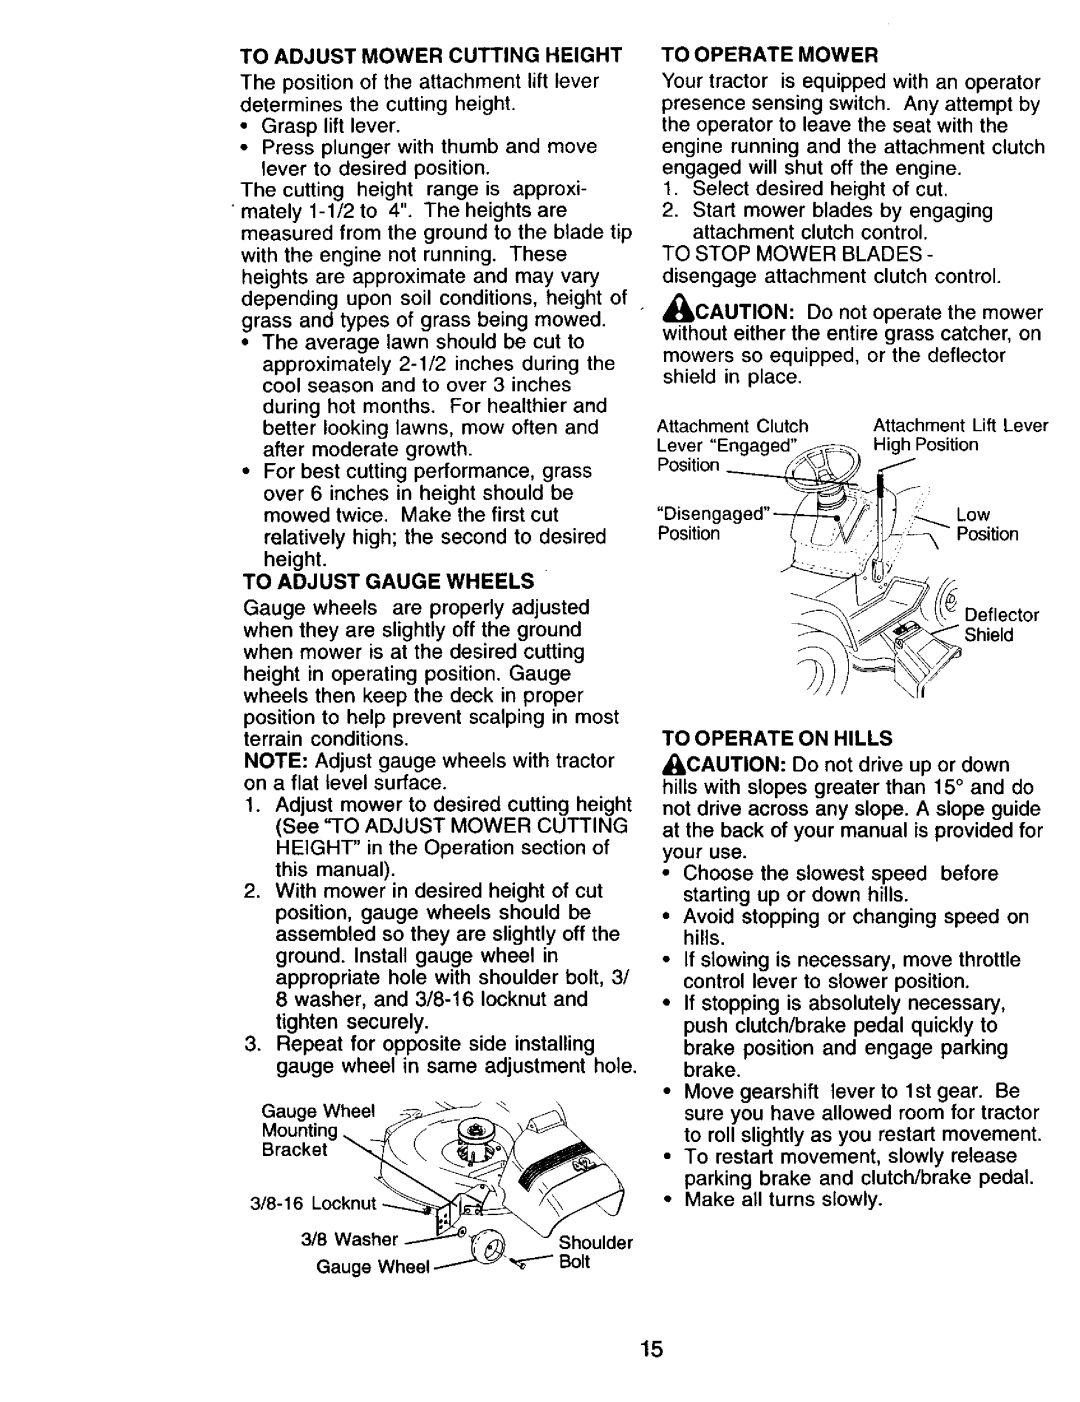 Craftsman 917.271815 owner manual To Adjust Mower Cutting Height, To Adjust Gauge Wheels, To Operate Mower, _Caution 